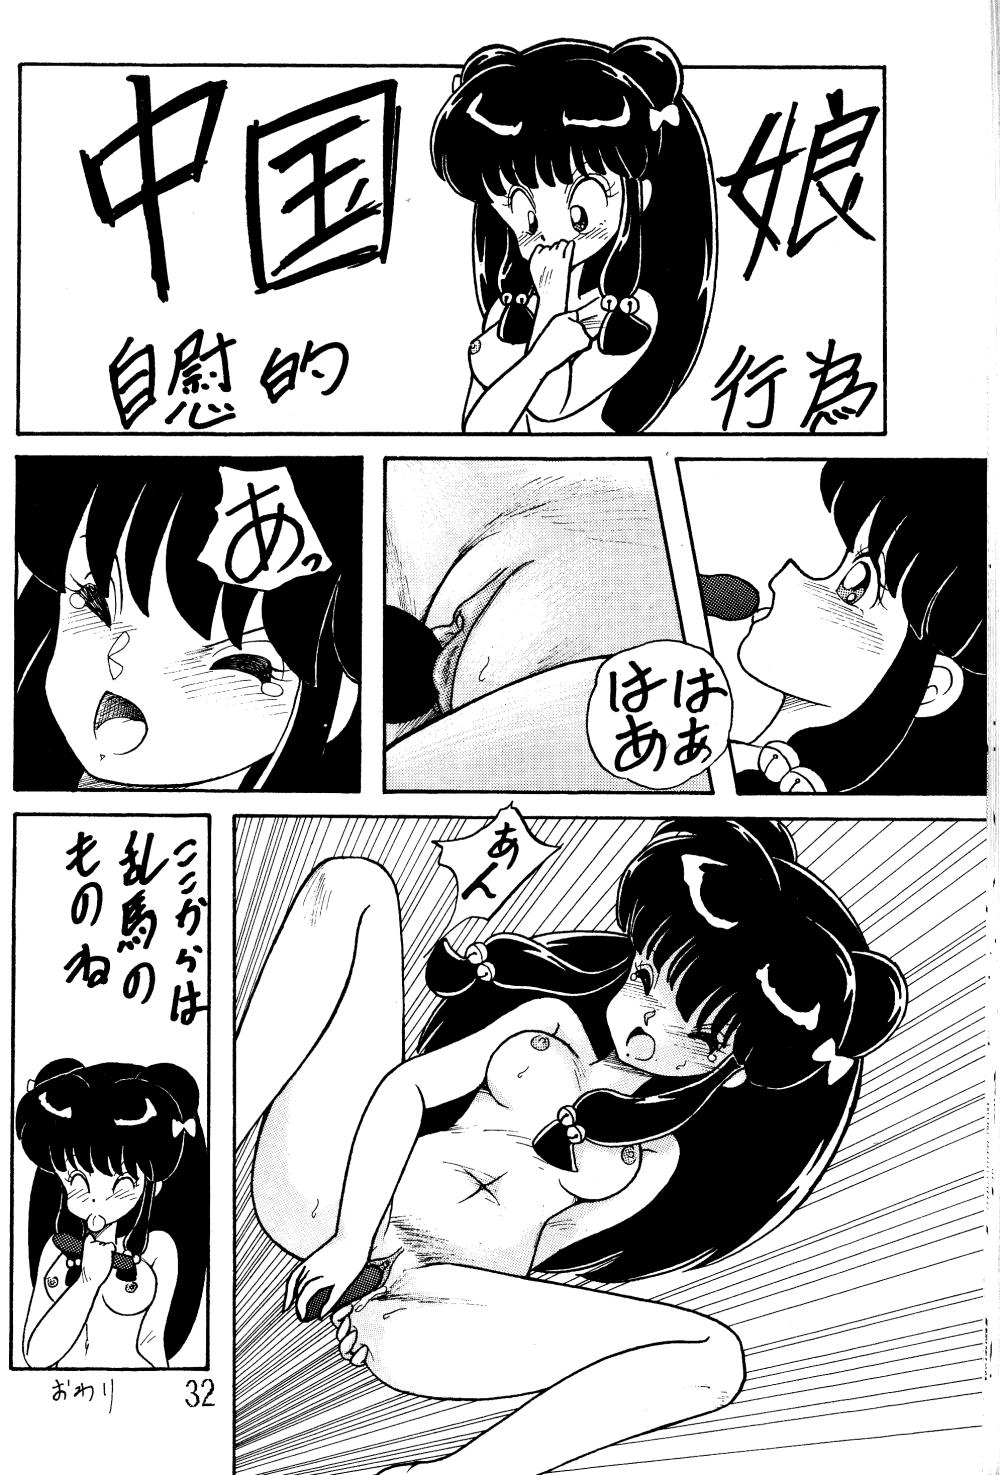 NOTORIOUS Ranma 1/2 Special 30